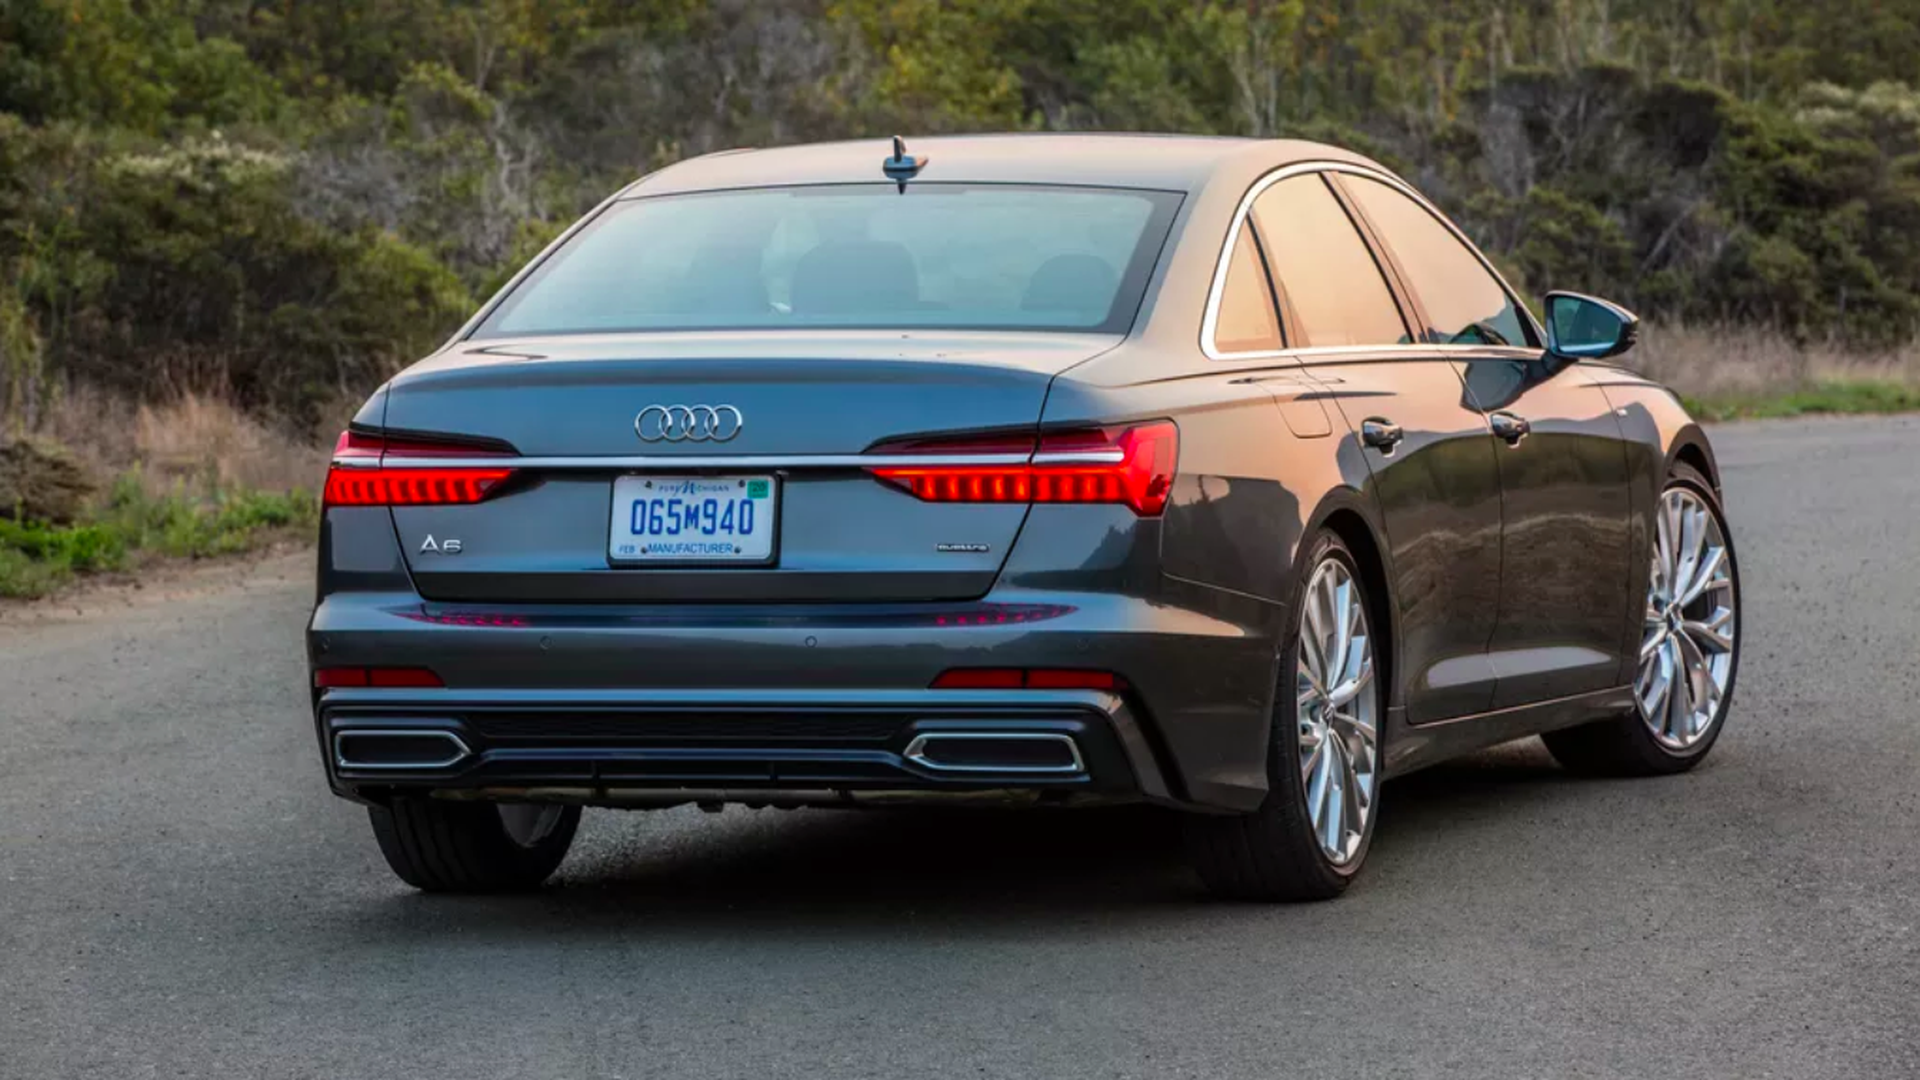 This image shows a rear end view of the Audi A6.